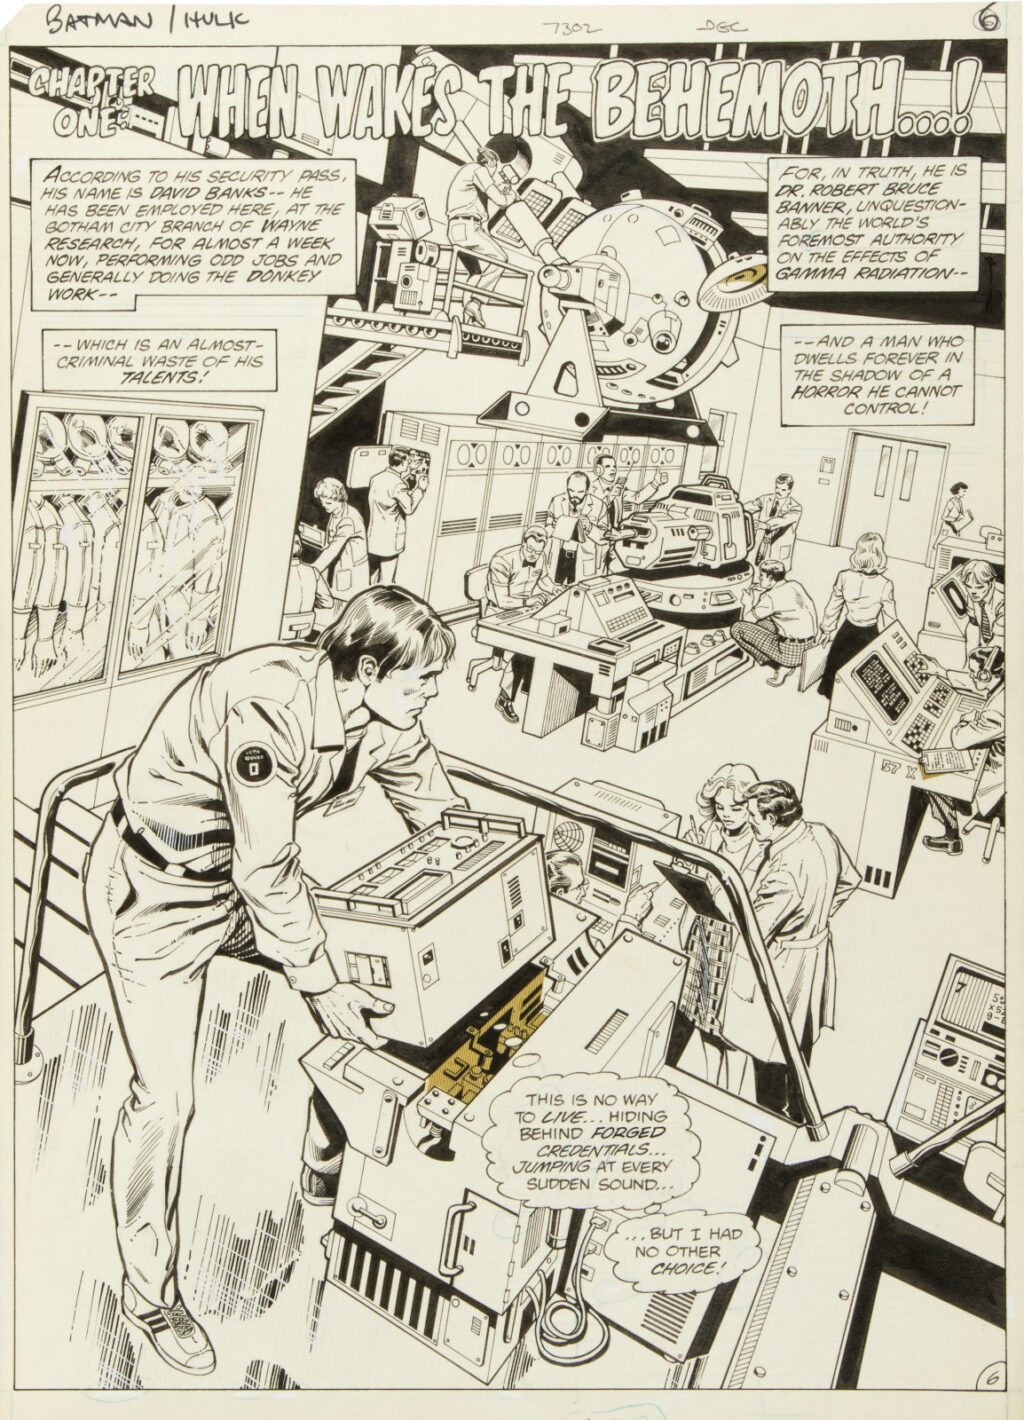 DC Special Series issue 27 page 6 by Jose Luis Garcia Lopez and Dick Giordano